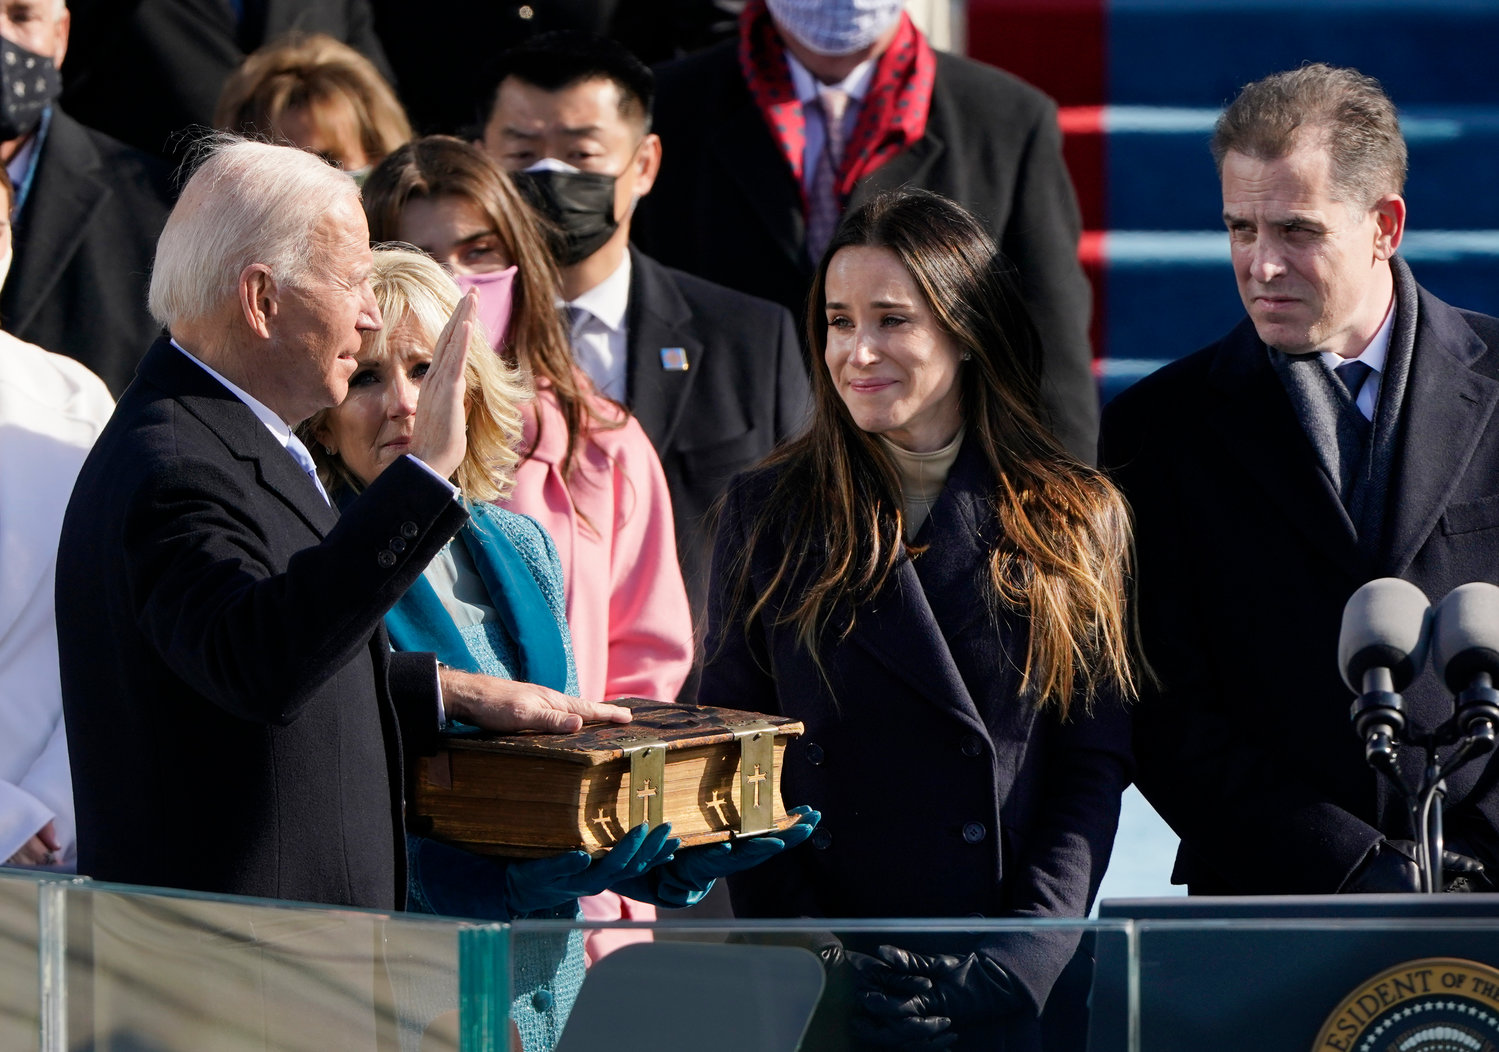 THE OATH — Joe Biden is sworn in as the 46th president of the United States by Chief Justice John Roberts as Jill Biden holds the Bible during the 59th Presidential Inauguration at the U.S. Capitol in Washington on Jan. 20.